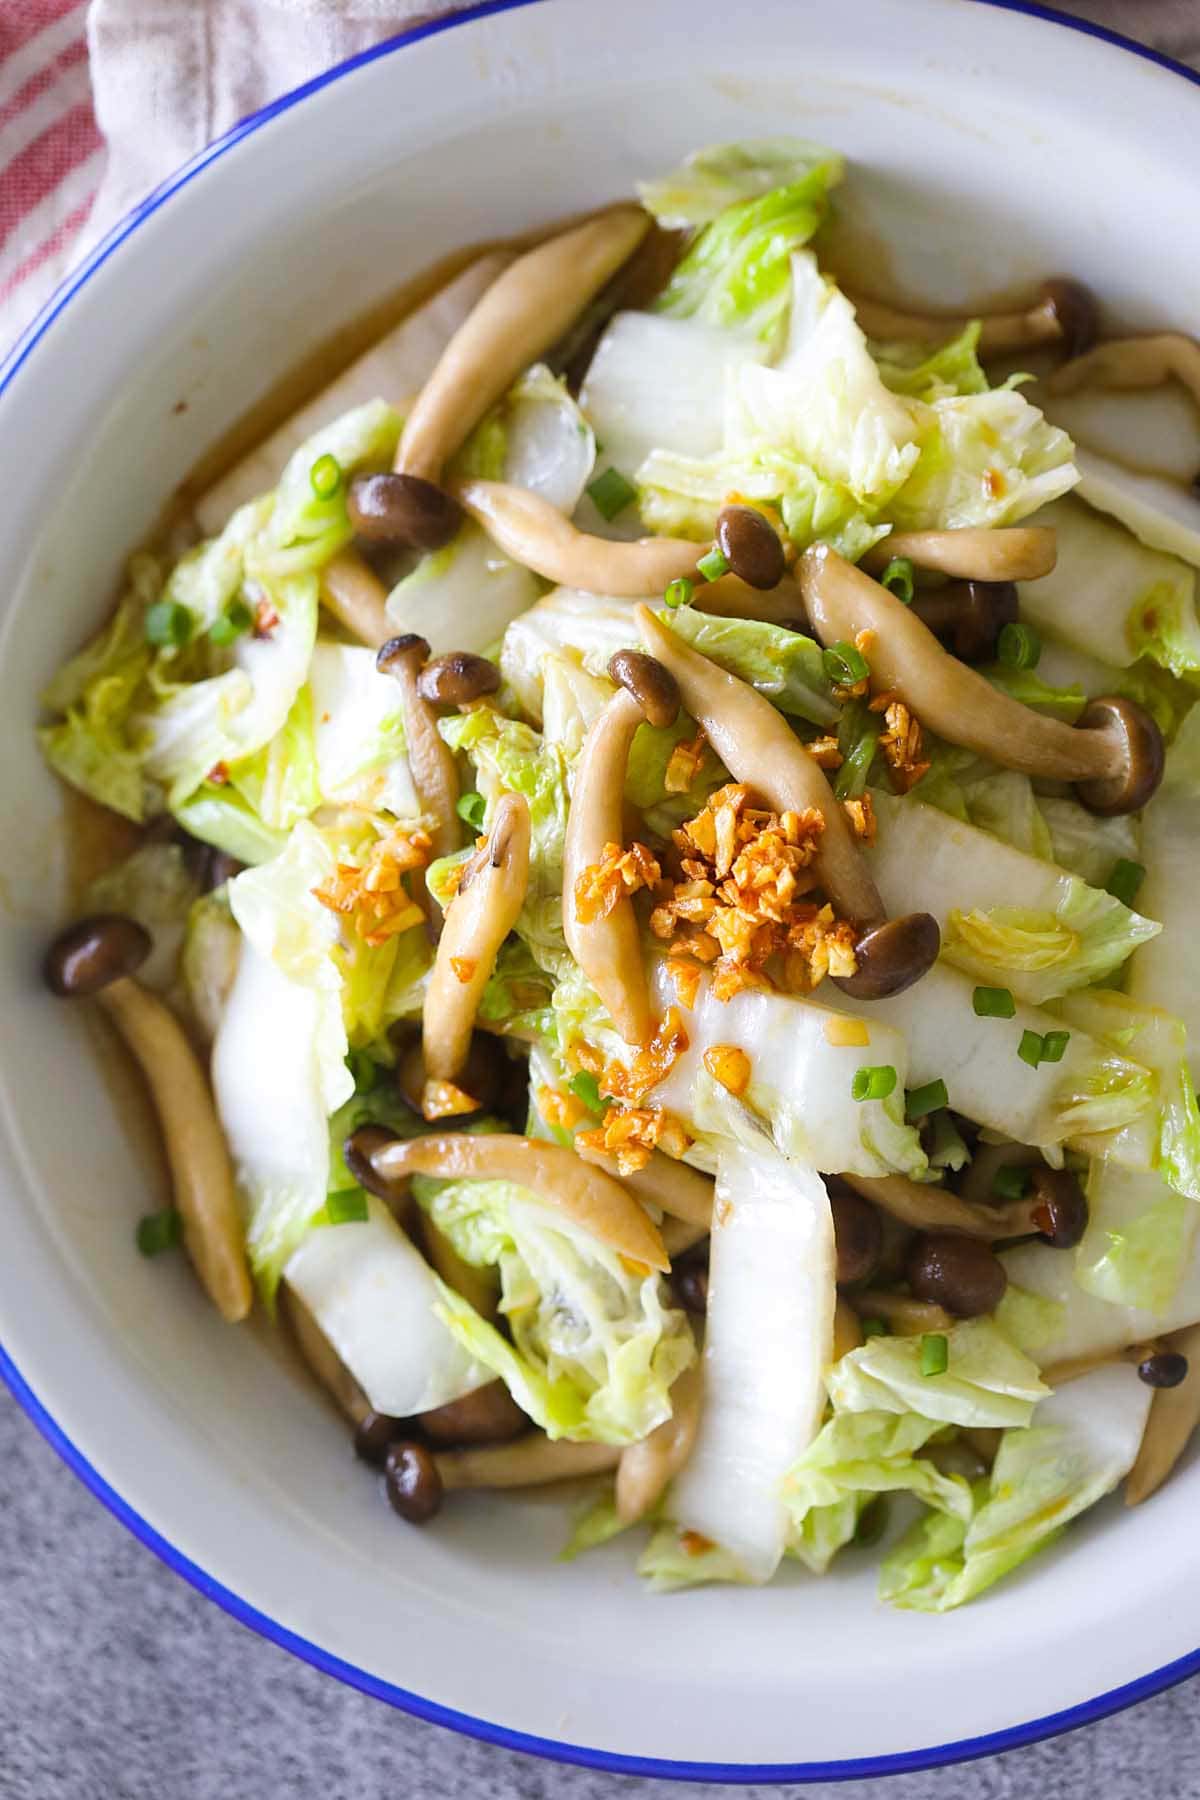 Homemade Chinese cabbage stir fry with mushroom and oyster sauce.